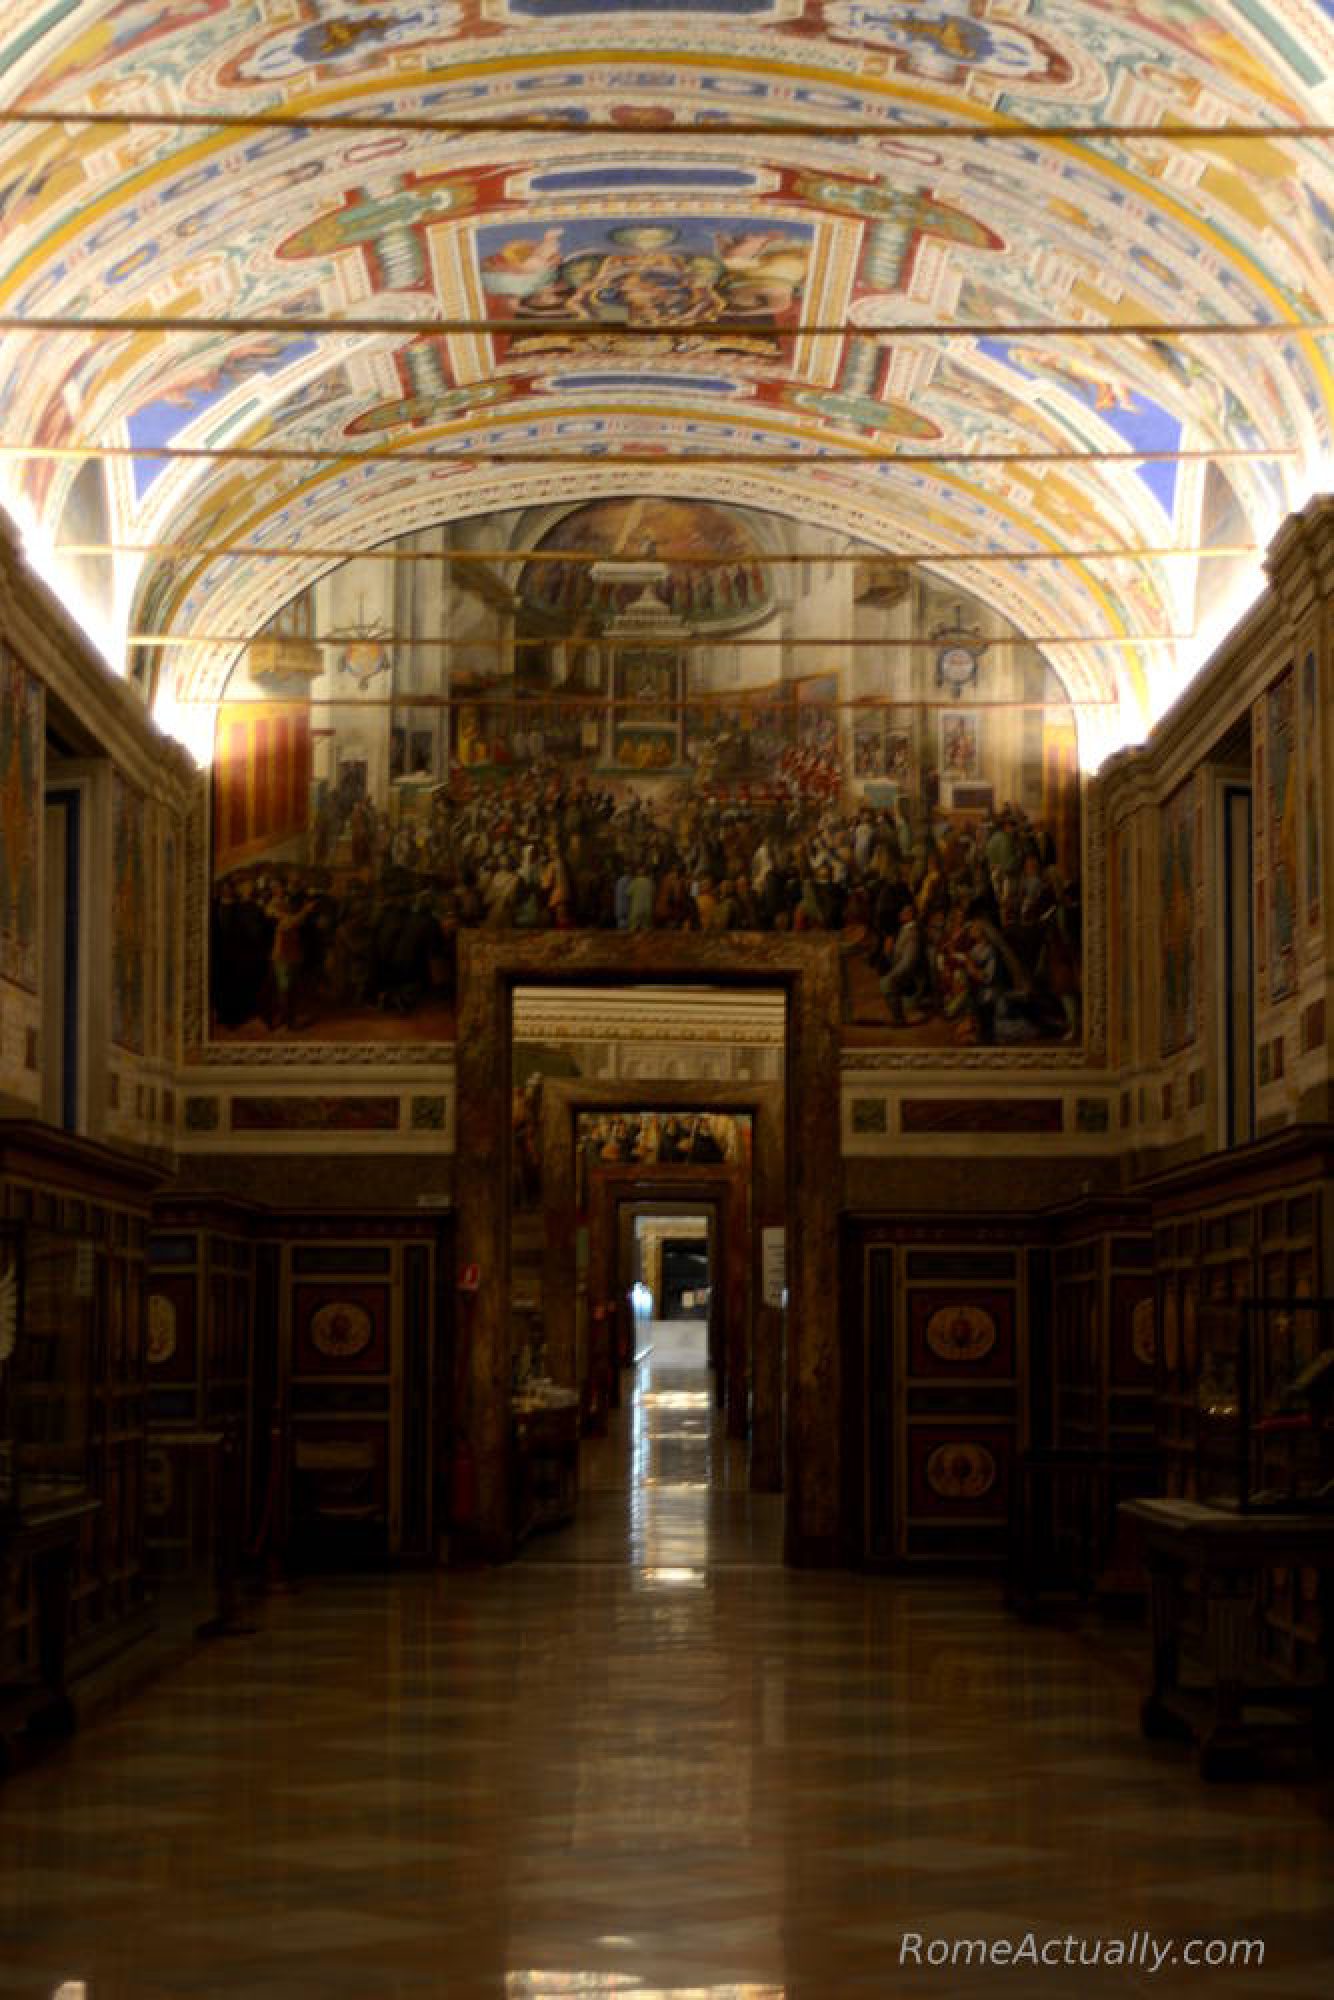 Image: Vatican Museums in Rome